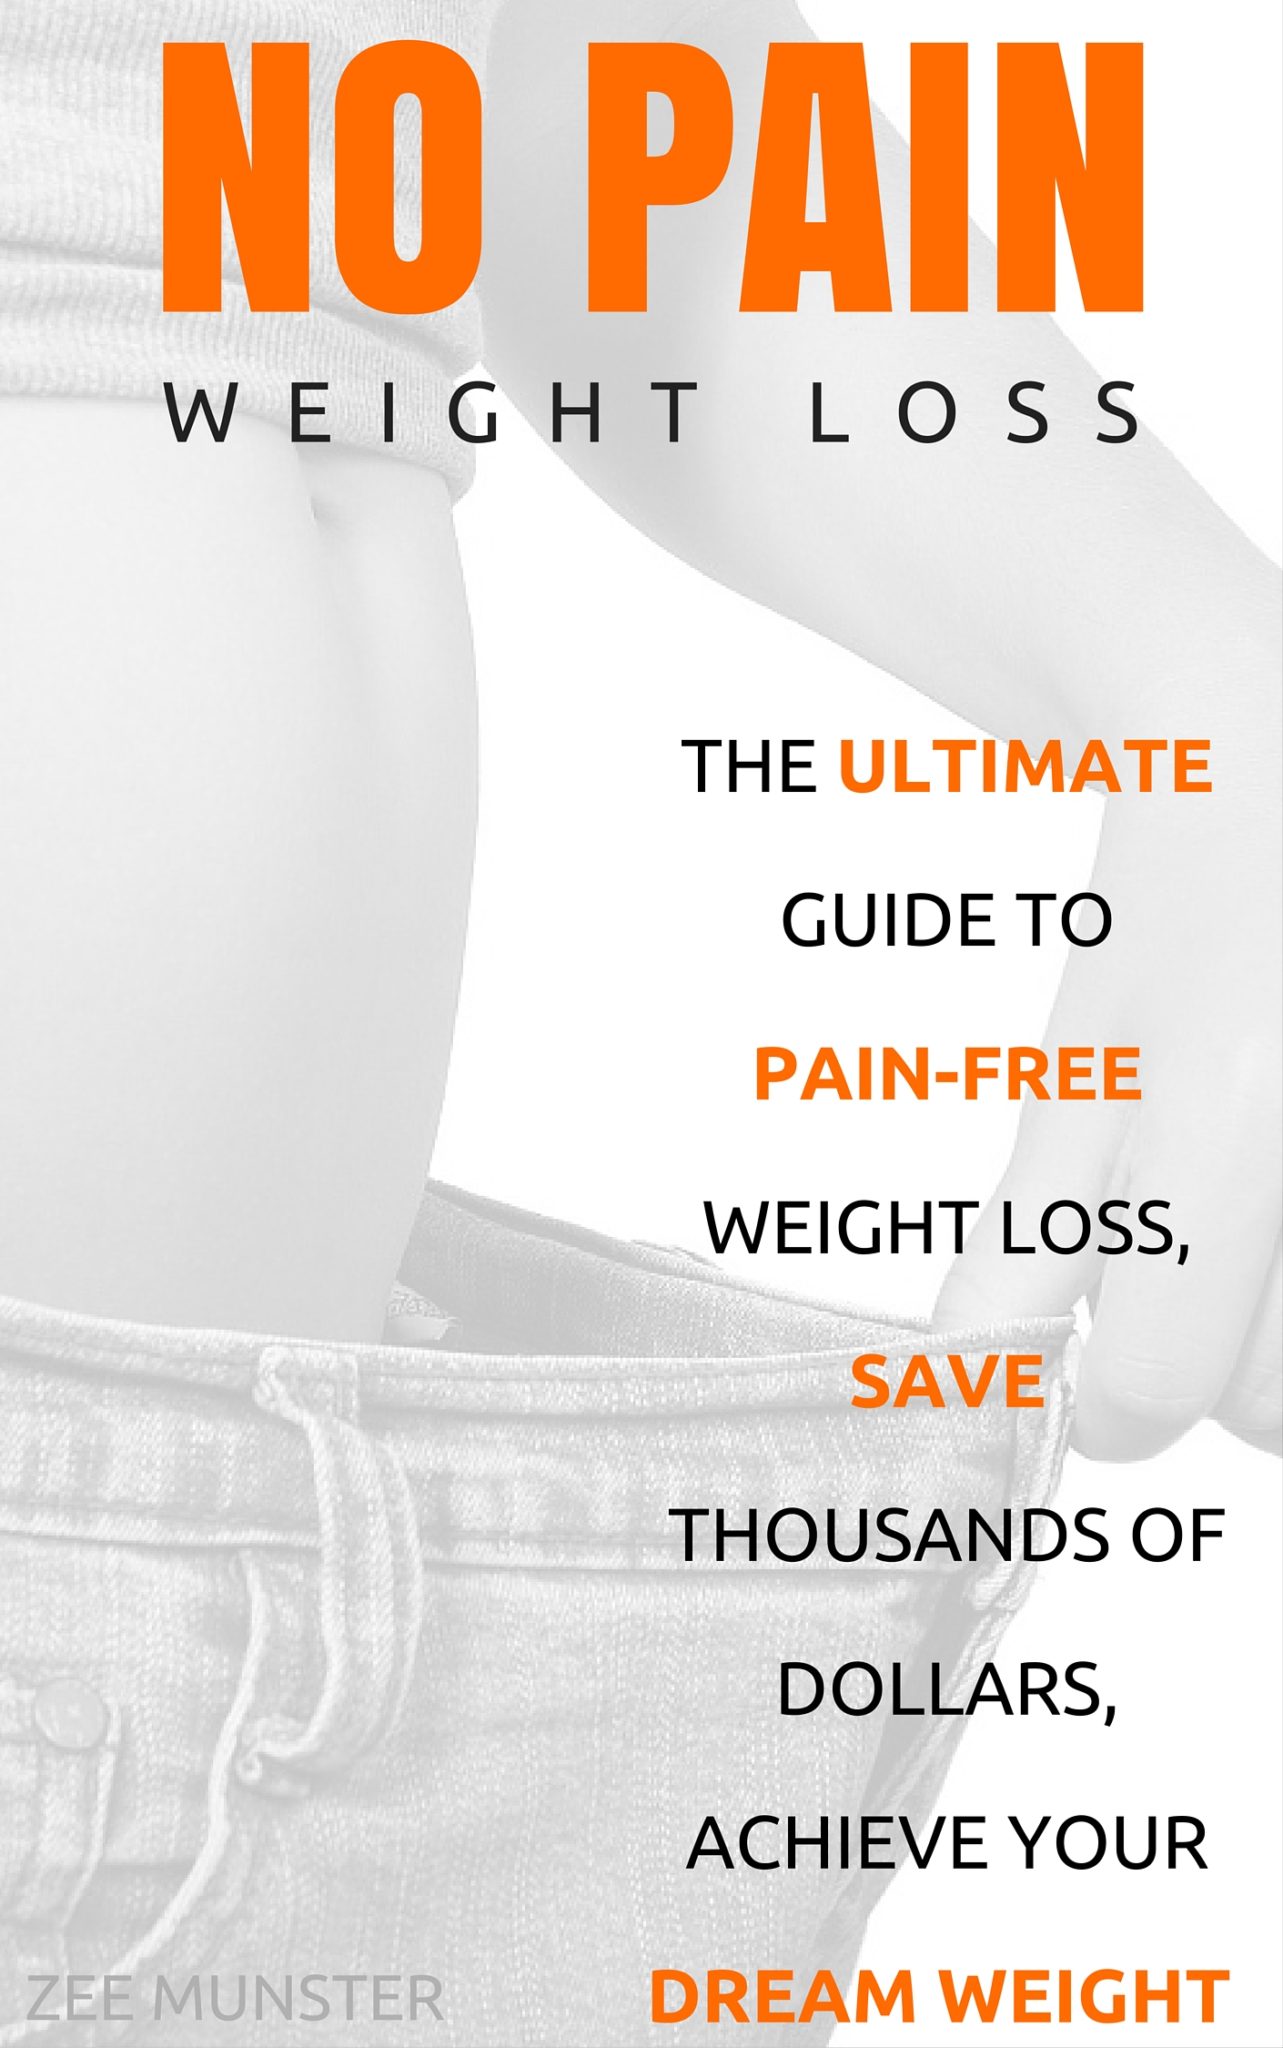 FREE: NO PAIN Weight Loss: The Ultimate Guide To Pain-Free Weight Loss, Save Thousands of Dollars & Achieve Your Dream Weight by Zee Munster